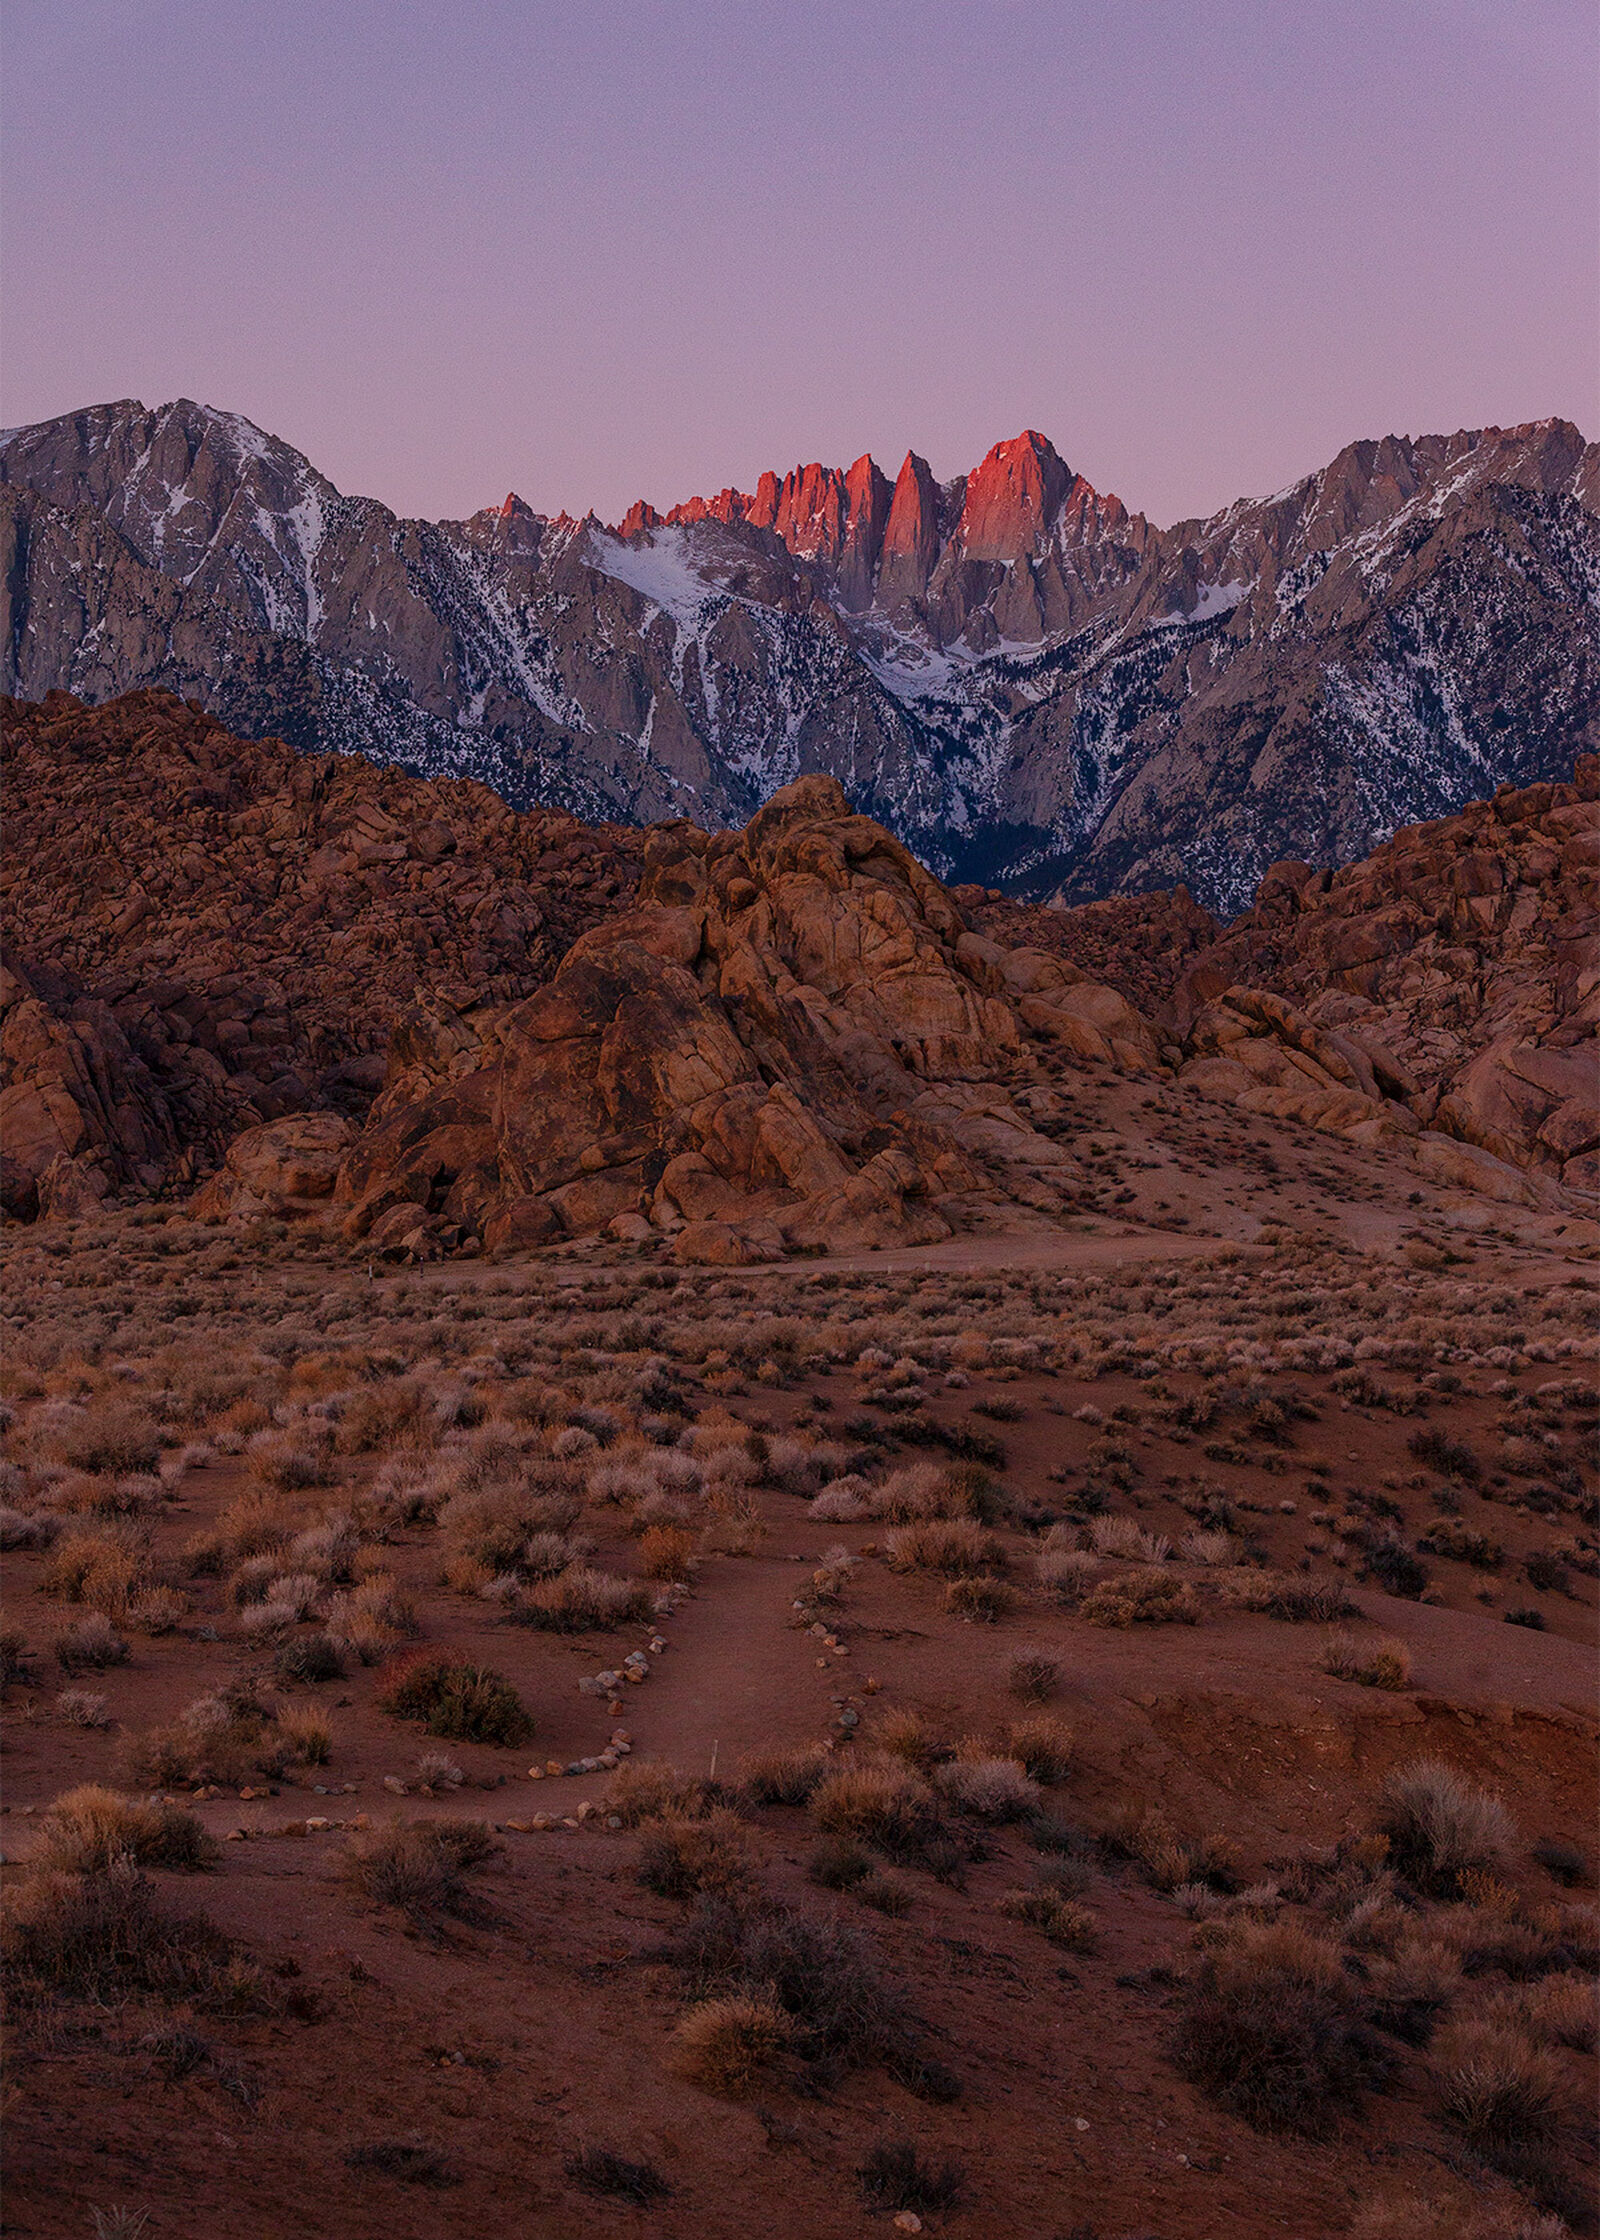 Mount Whitney lit by the rising sun in the Alabama Hills, California